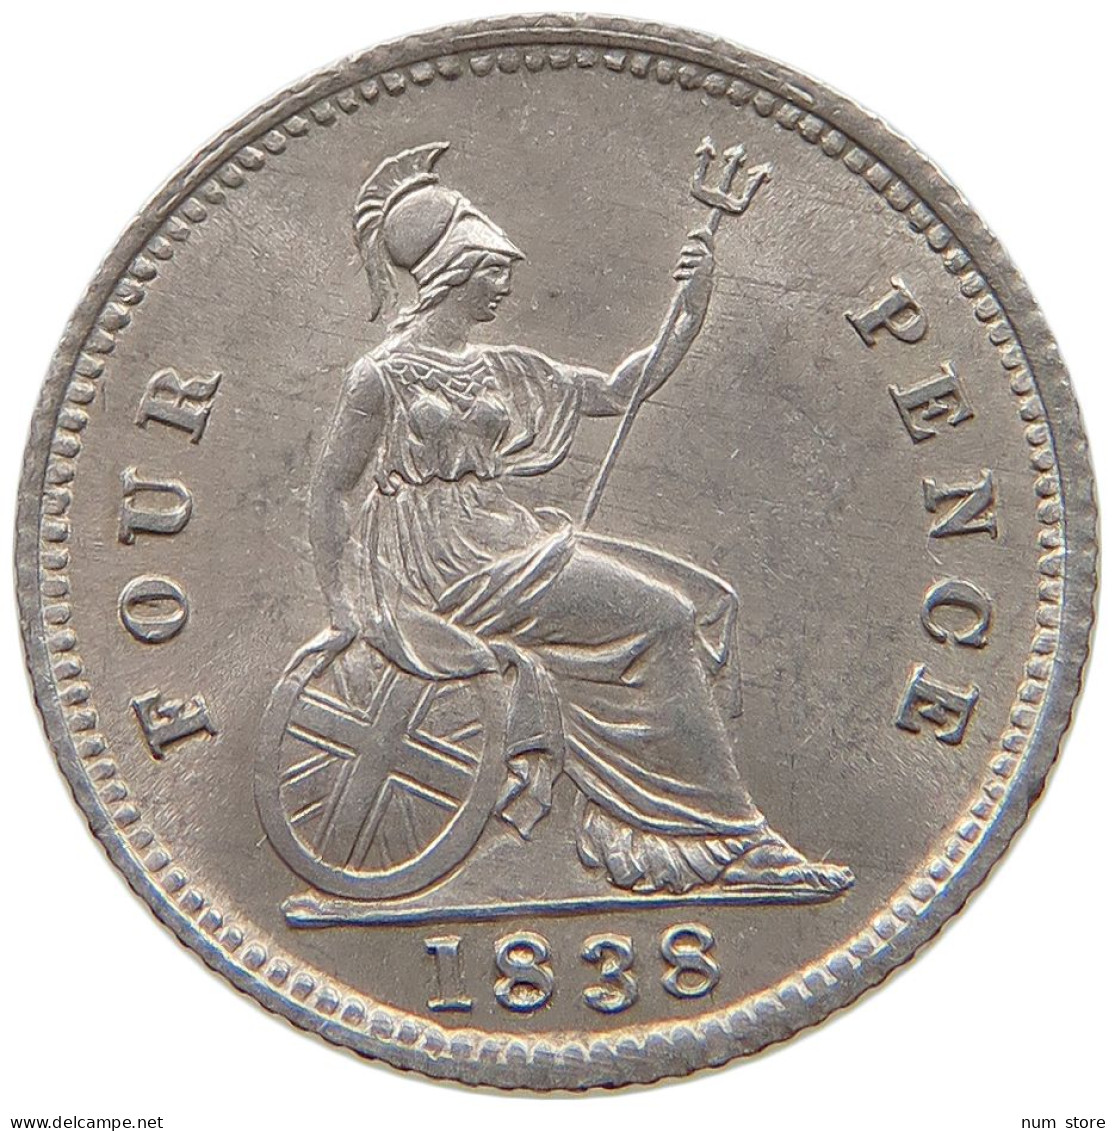 GREAT BRITAIN FOURPENCE 1838 Victoria 1837-1901 #t107 0473 - G. 4 Pence/ Groat